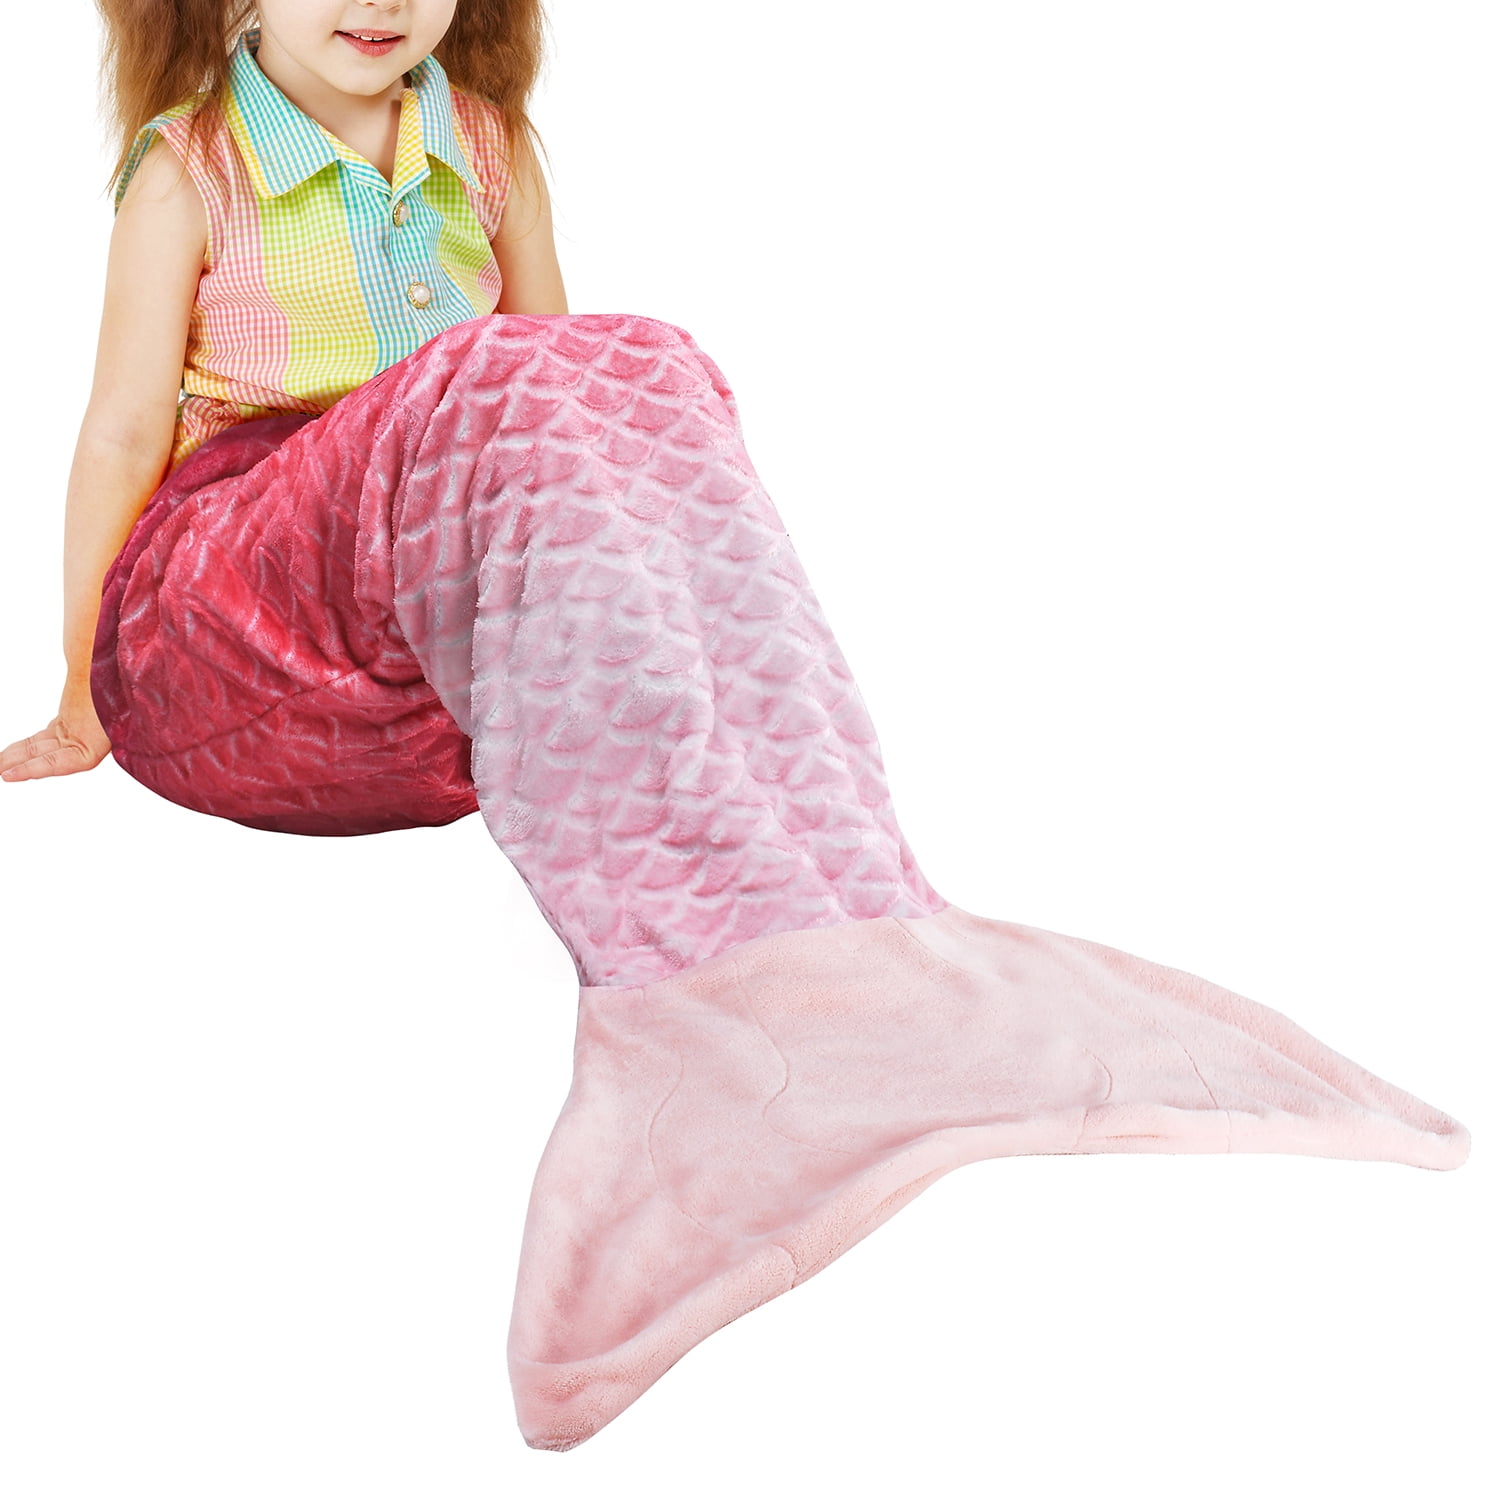 Mermaid Tail Blanket for Girls Super Soft Perfect for Bedroom Living Room Warm Purple/Purple Snuggie Tails for Kids with Sparkly Sequins Reading TV Cute Birthday Gifts for Teens and Kids 